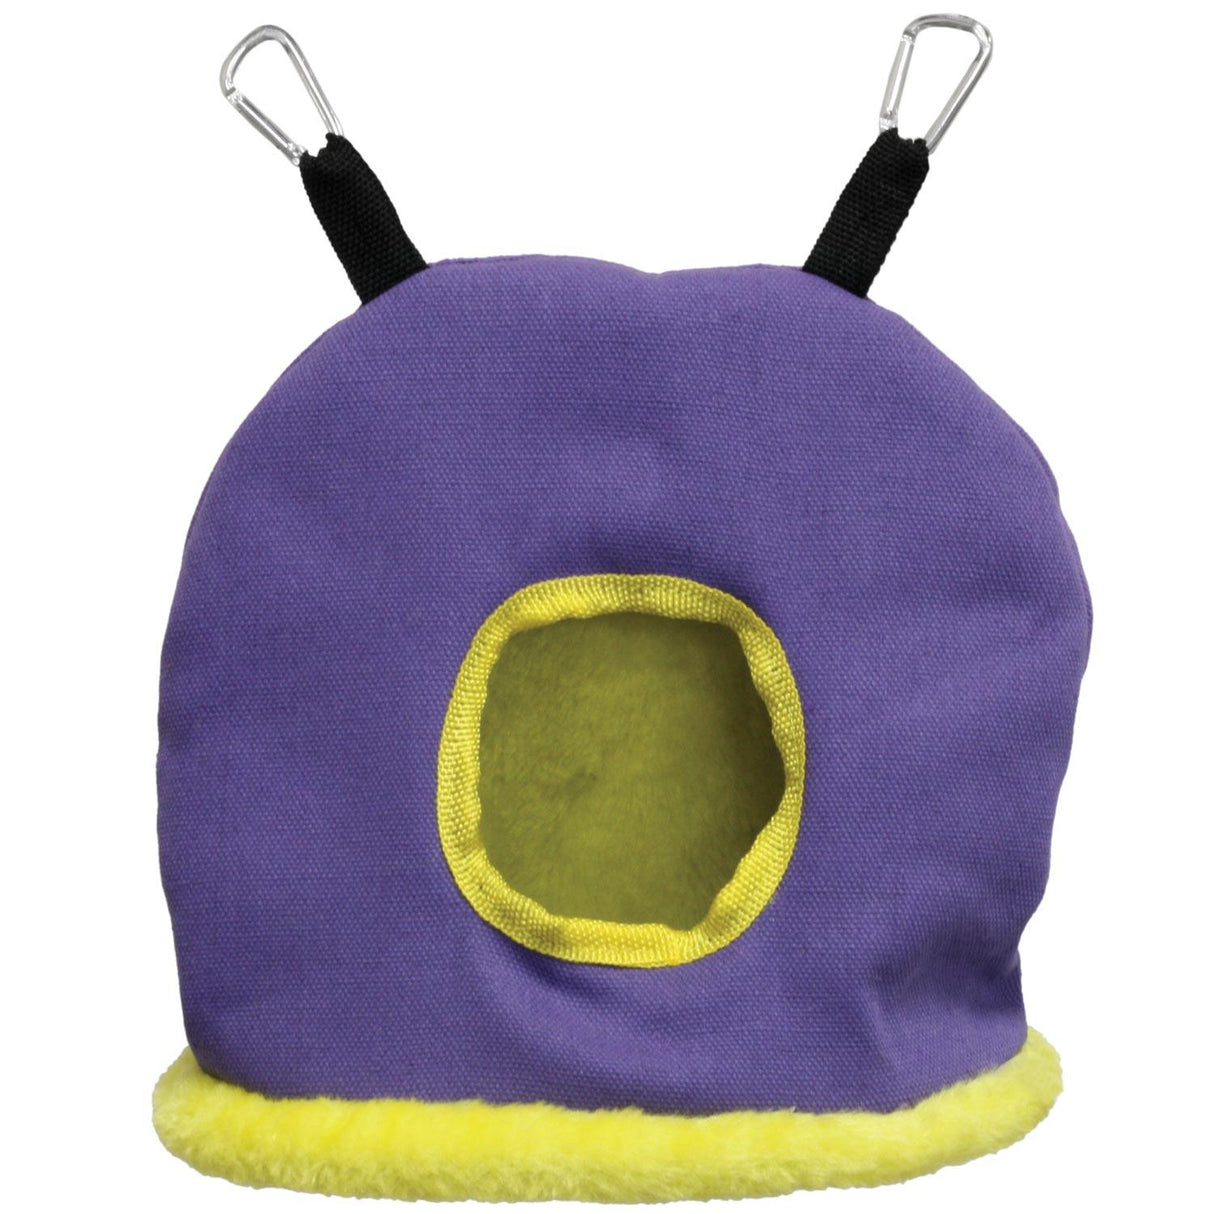 Prevue Snuggle Sack Large Bird Shelter for Sleeping, Playing and Hiding - PetMountain.com